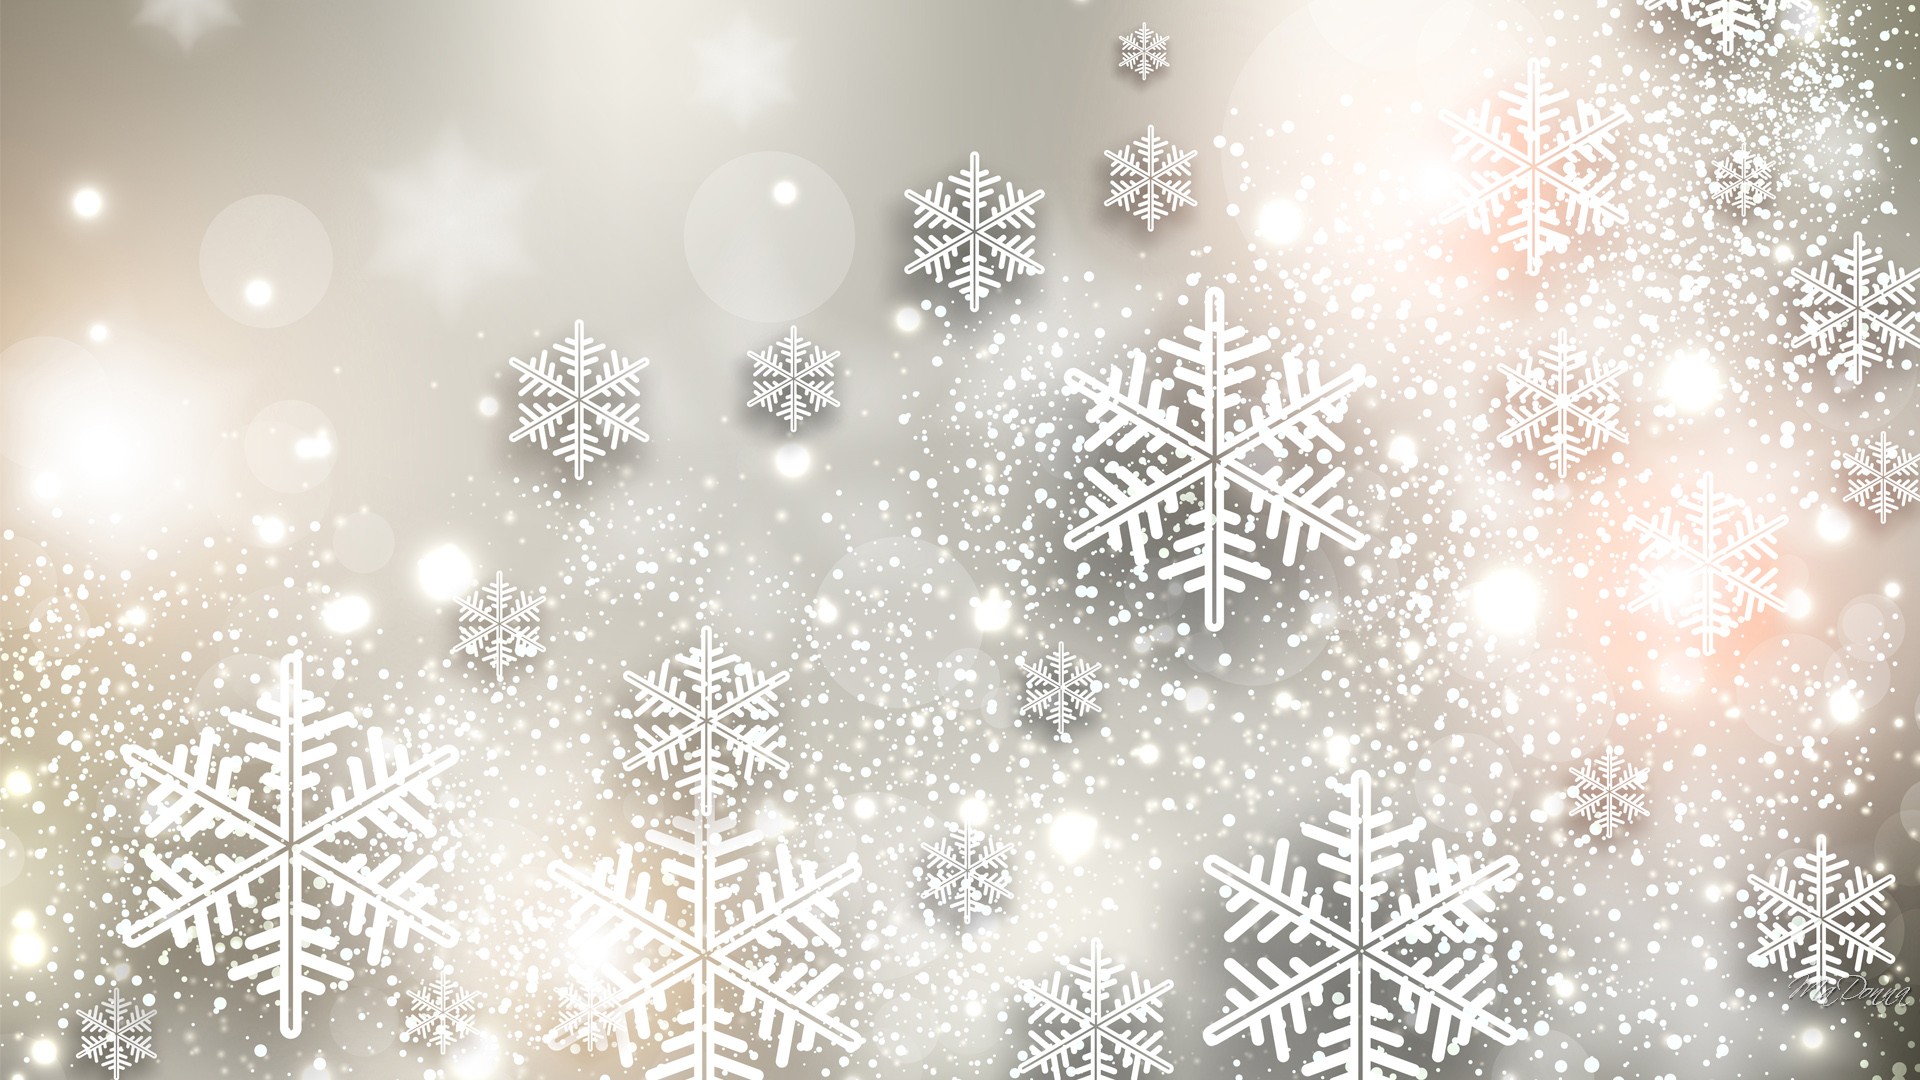 4. "White and Silver Snowflakes" - wide 4